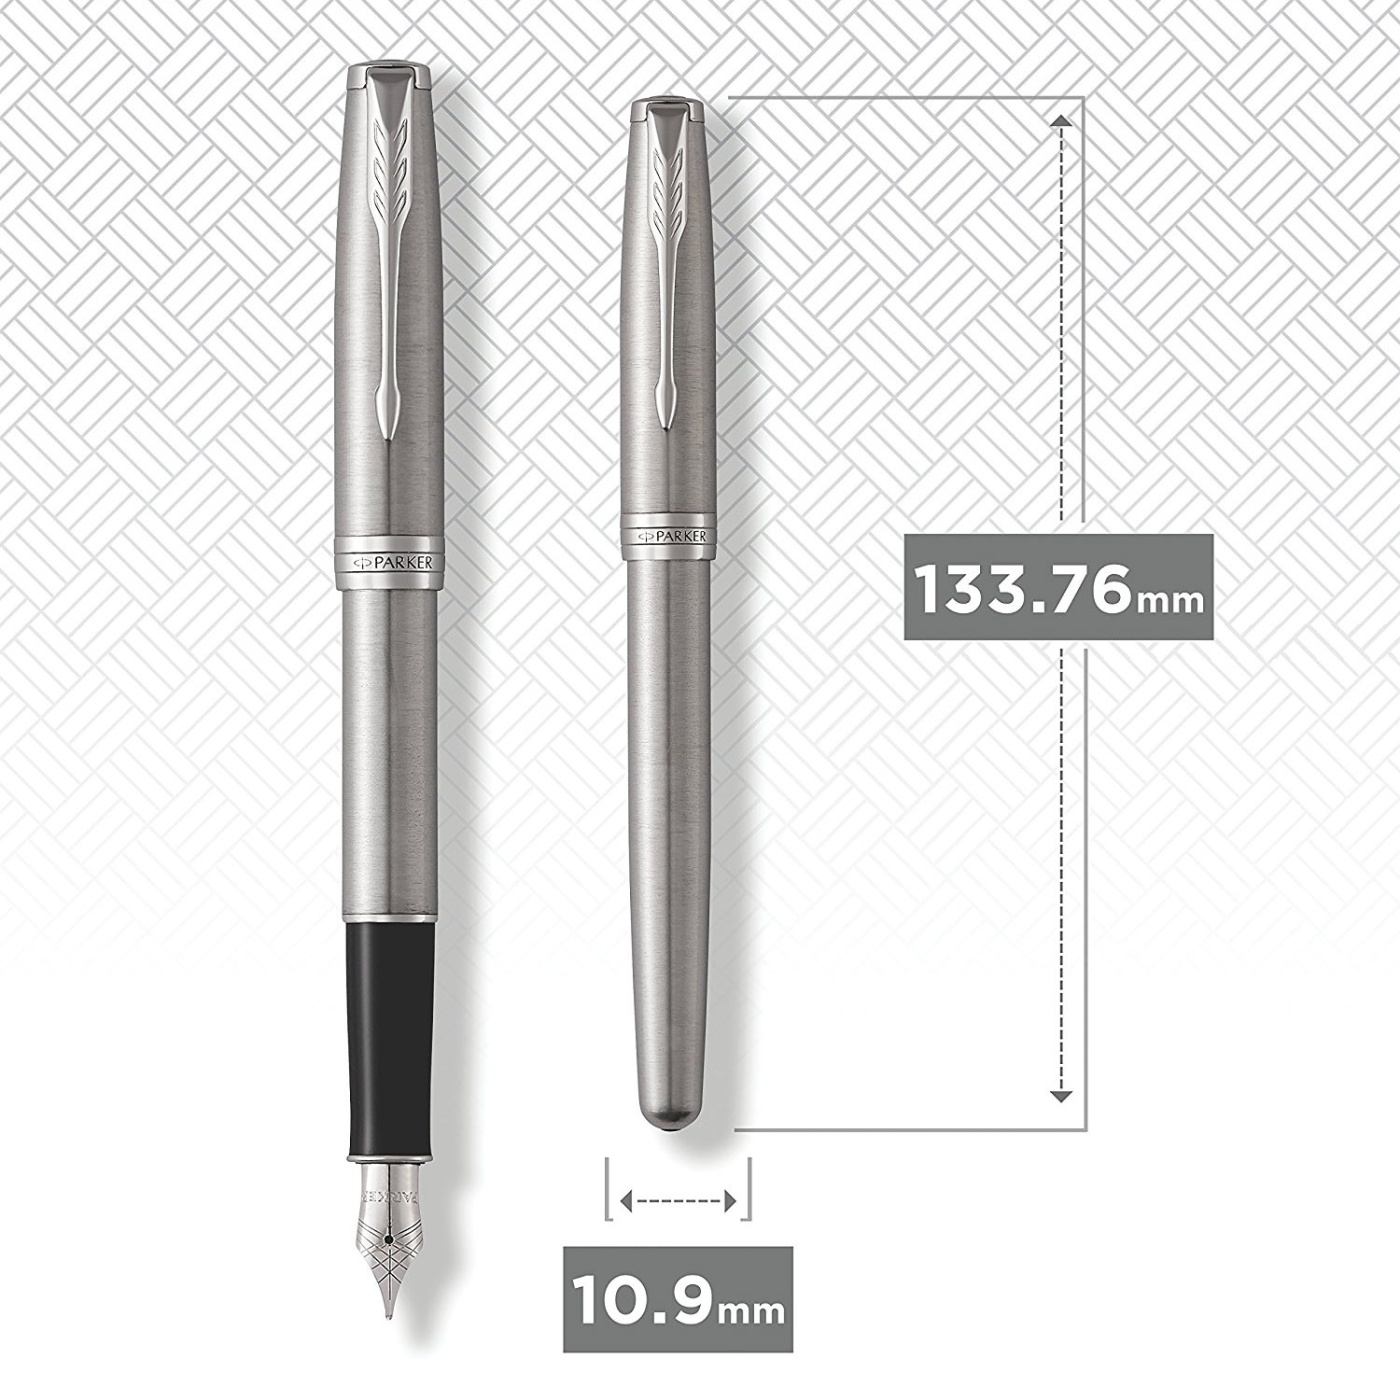 Sonnet Steel/Chrome Fountain pen in the group Pens / Fine Writing / Gift Pens at Voorcrea (104817_r)